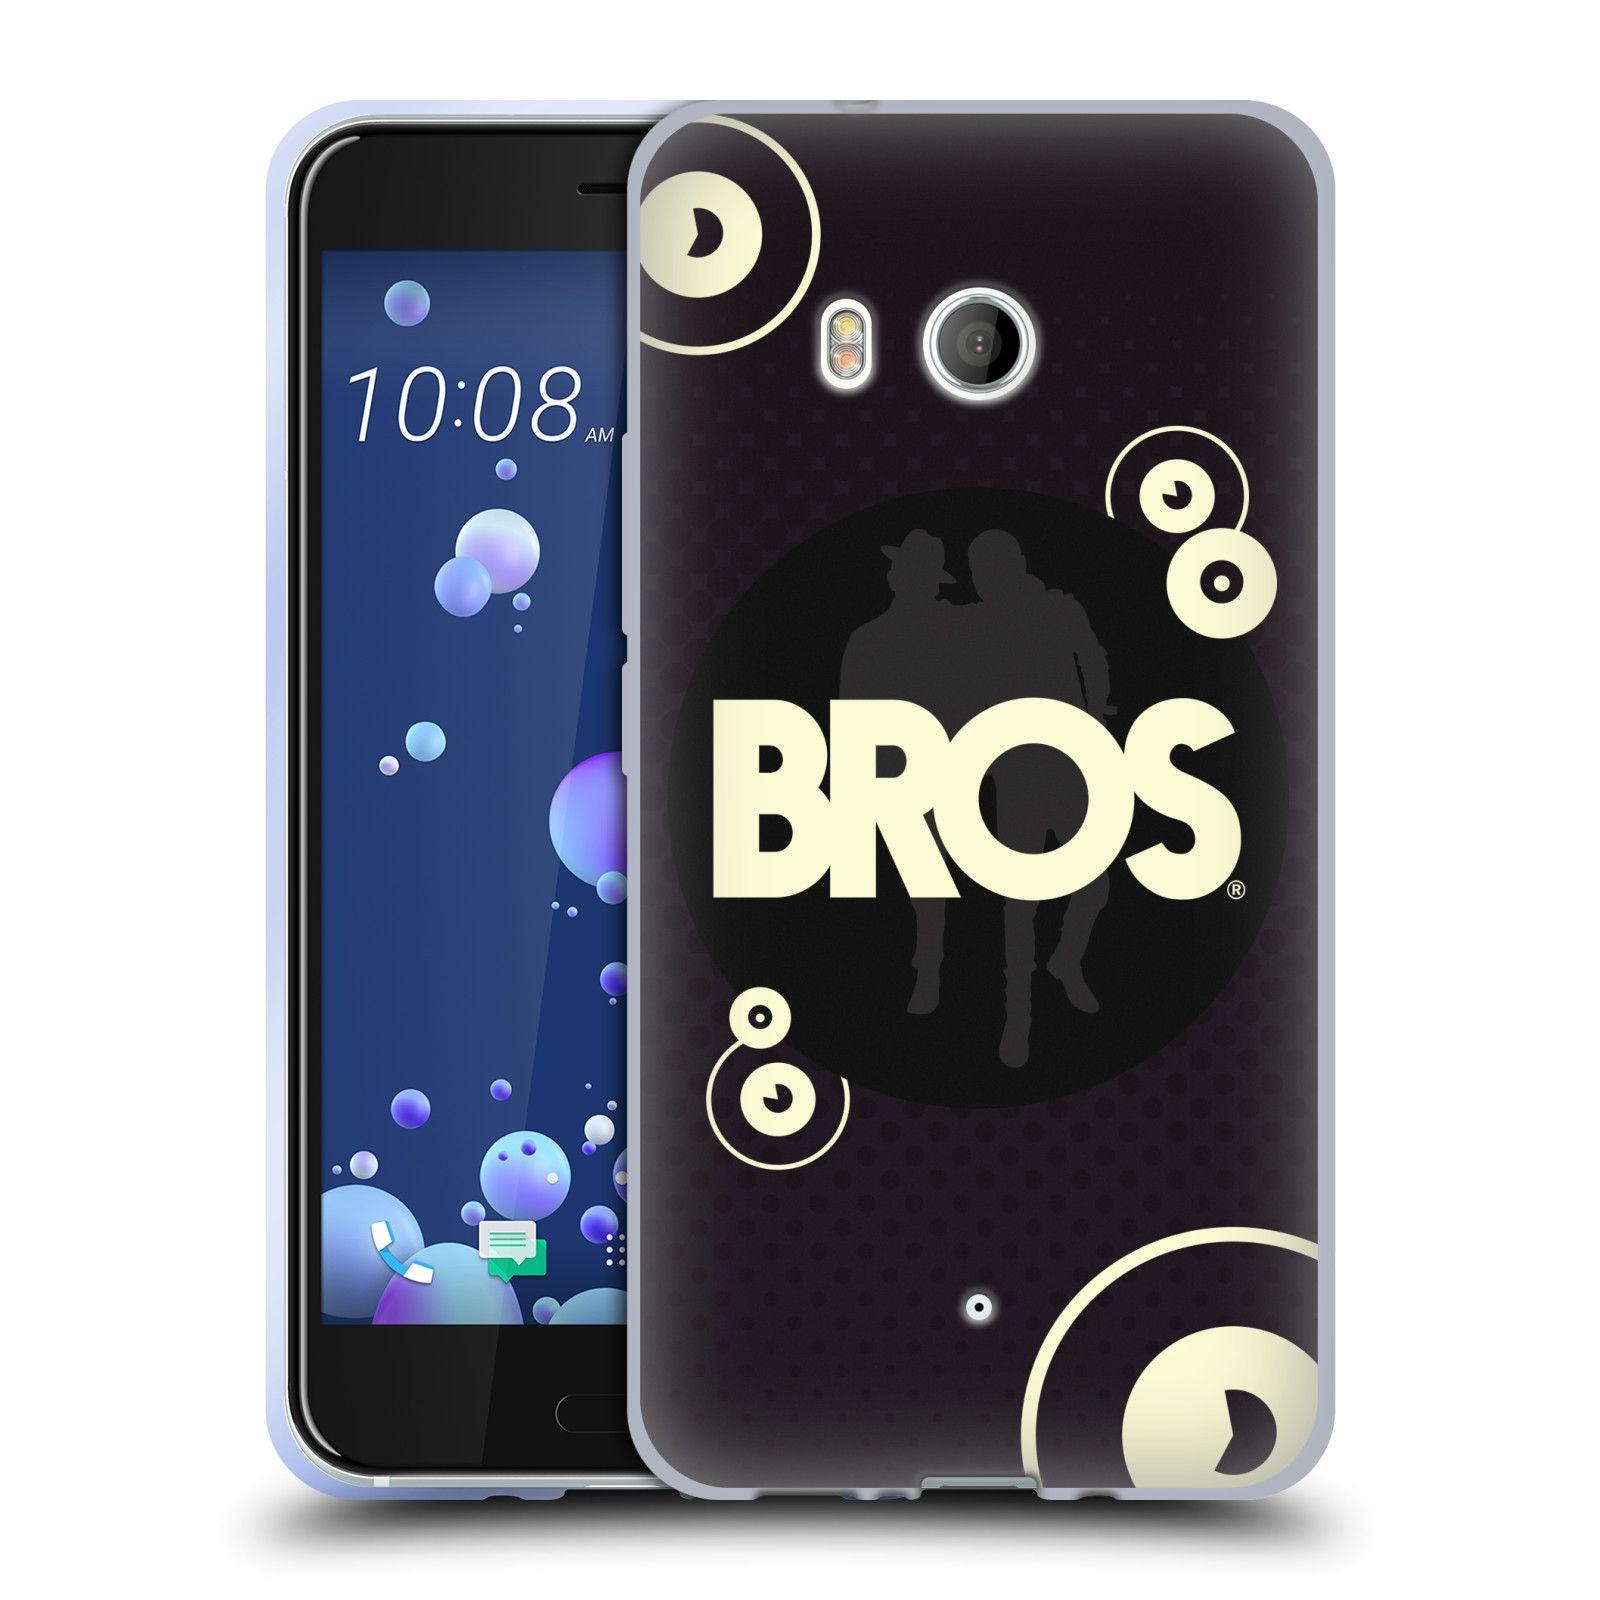 A9 Logo - Official Bros Logo Art Soft GEL Case for HTC PHONES 1 Text HTC One